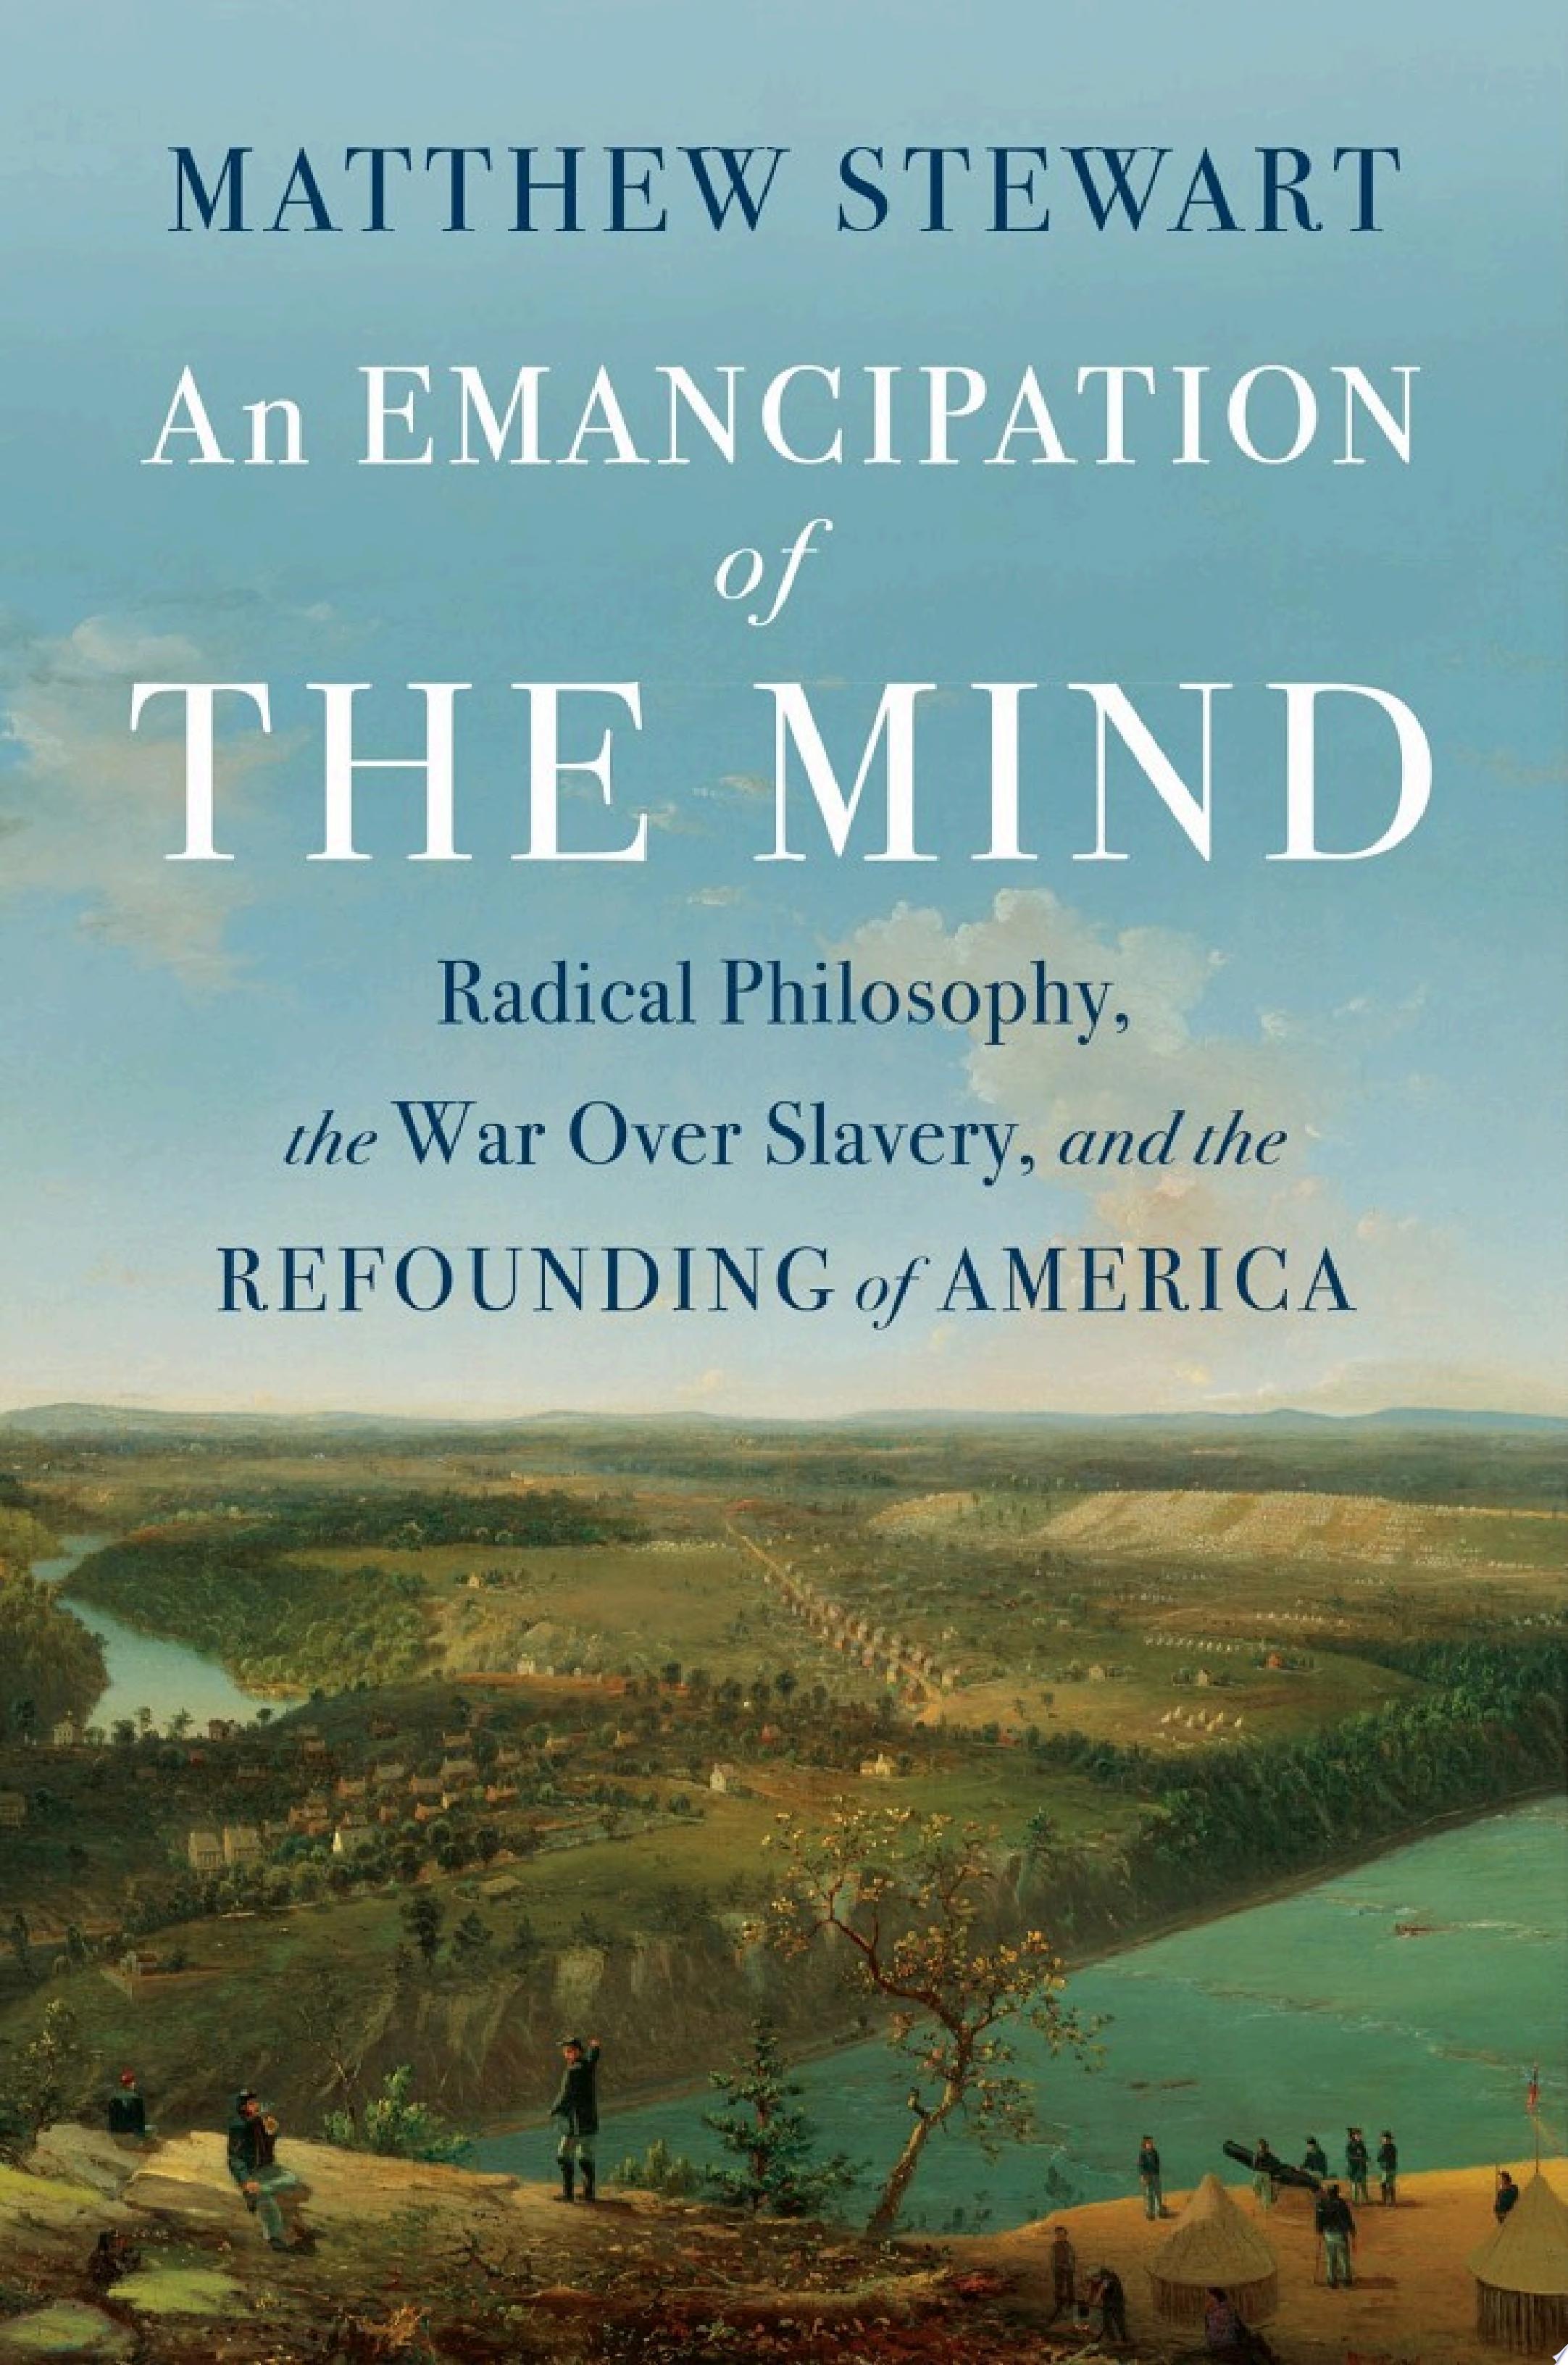 Image for "An Emancipation of the Mind: Radical Philosophy, the War over Slavery, and the Refounding of America"